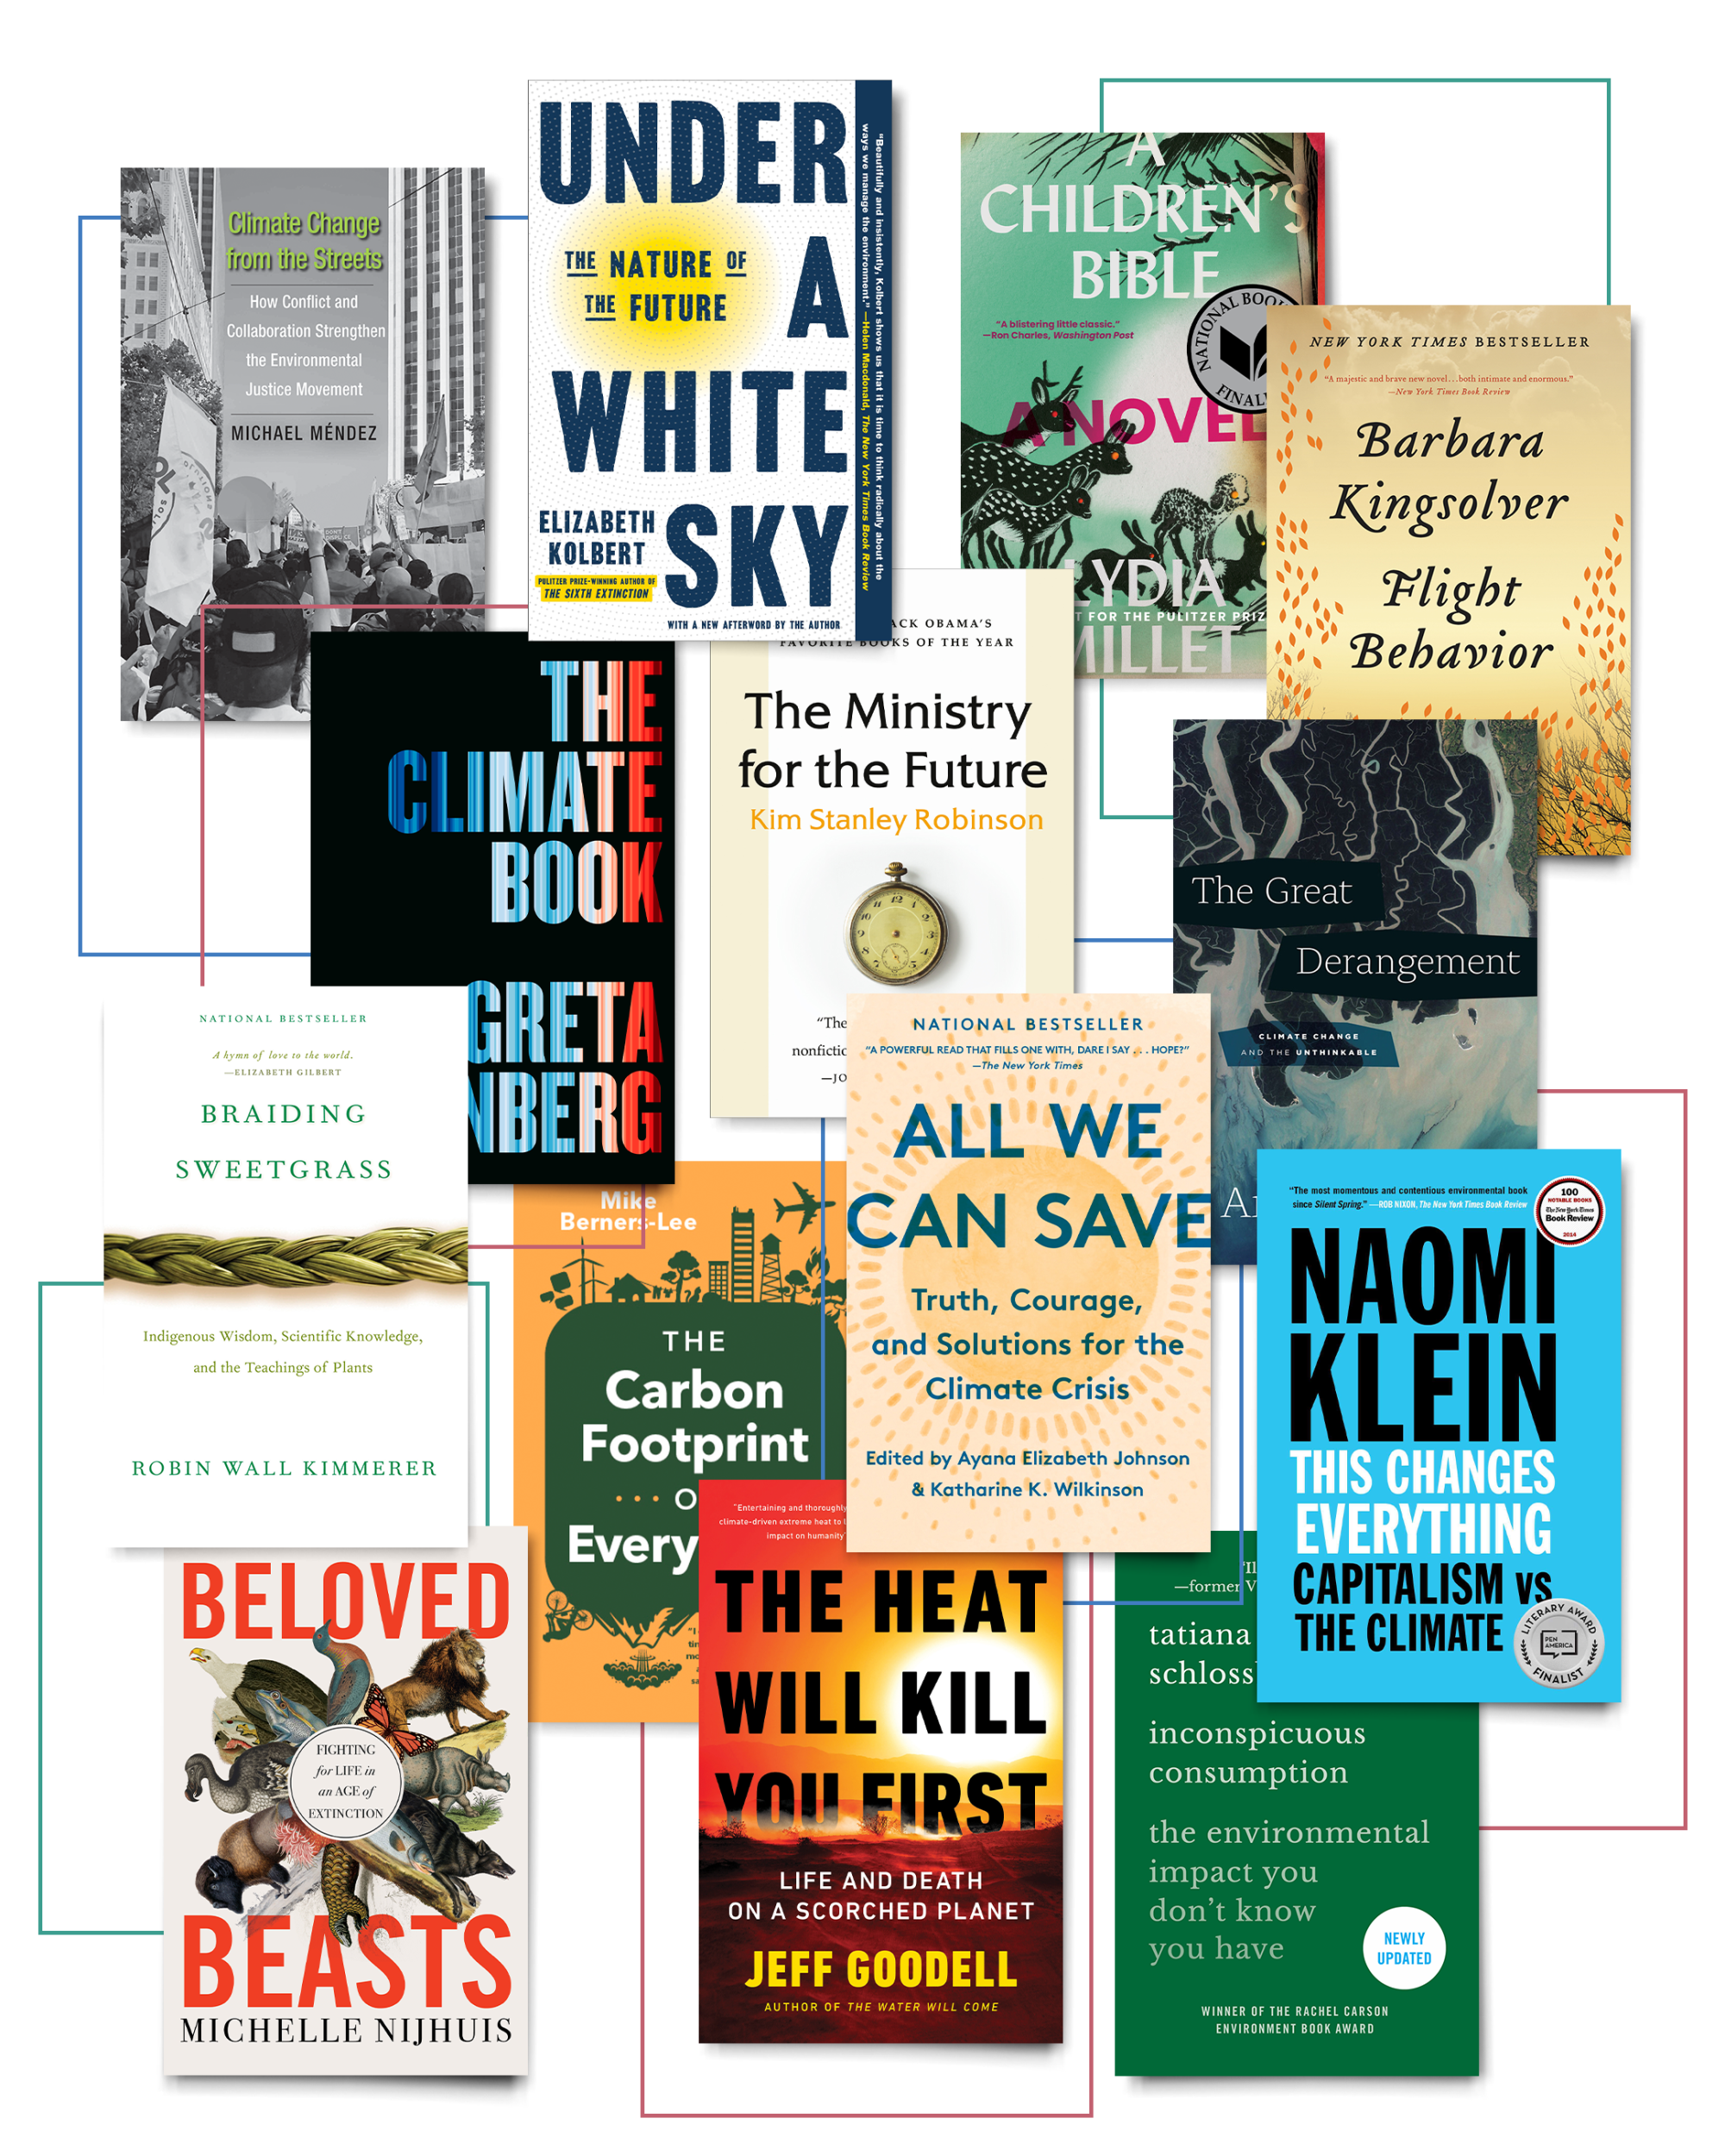 Want to read more books about climate change? Try this list - Los